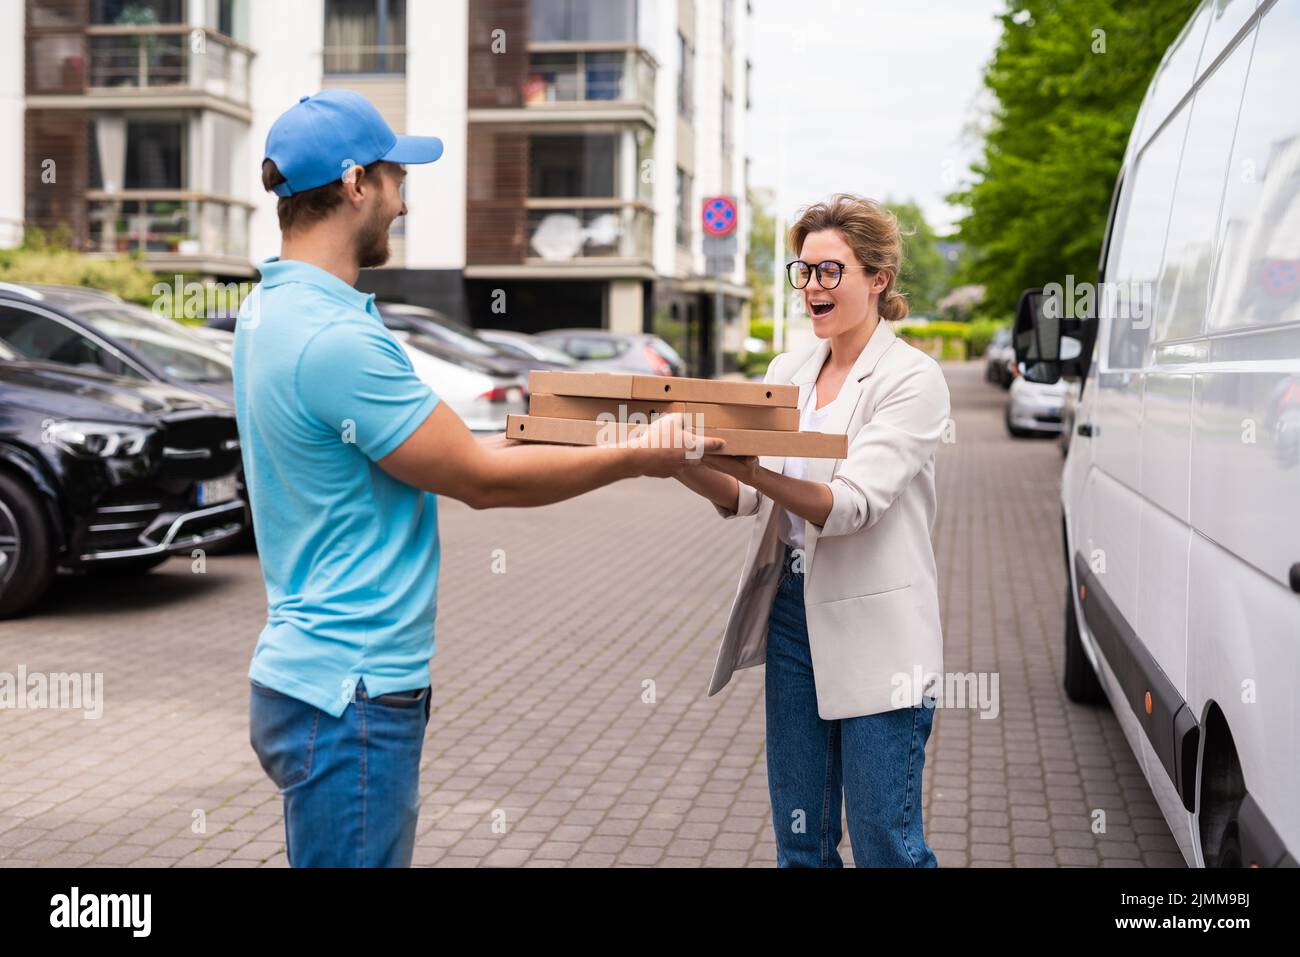 Delivery man wearing blue uniform delivers pizza to a woman client Stock Photo